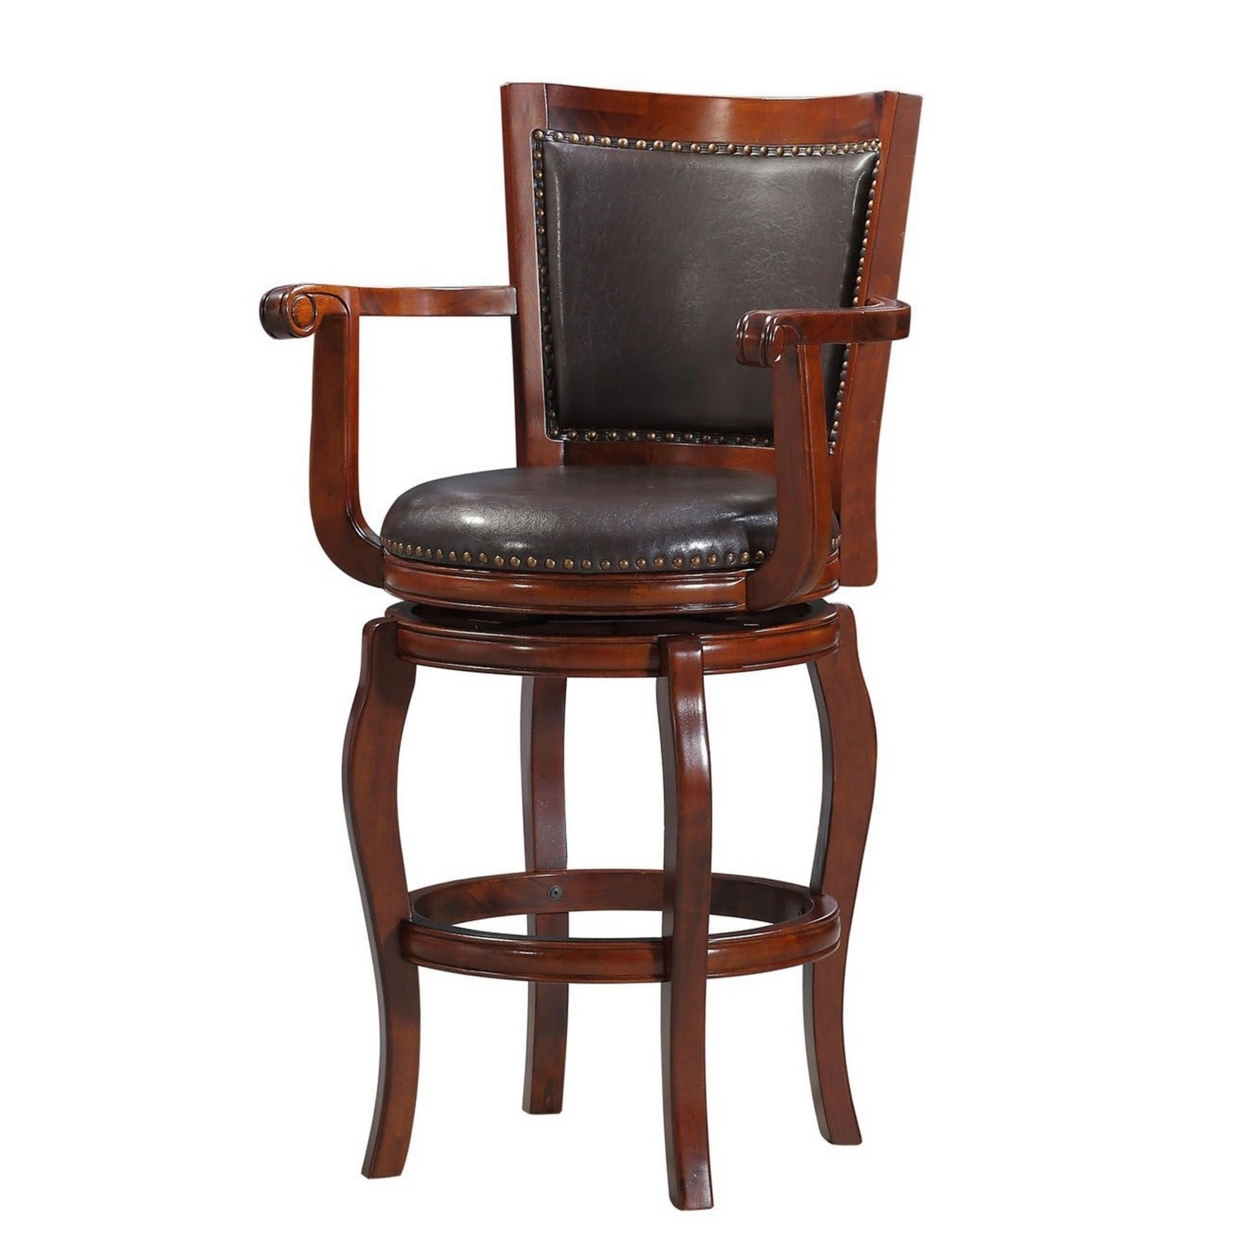 Swivel Barstool With Sleek Rolled Arms And Nailhead Accents, Brown- Saltoro Sherpi